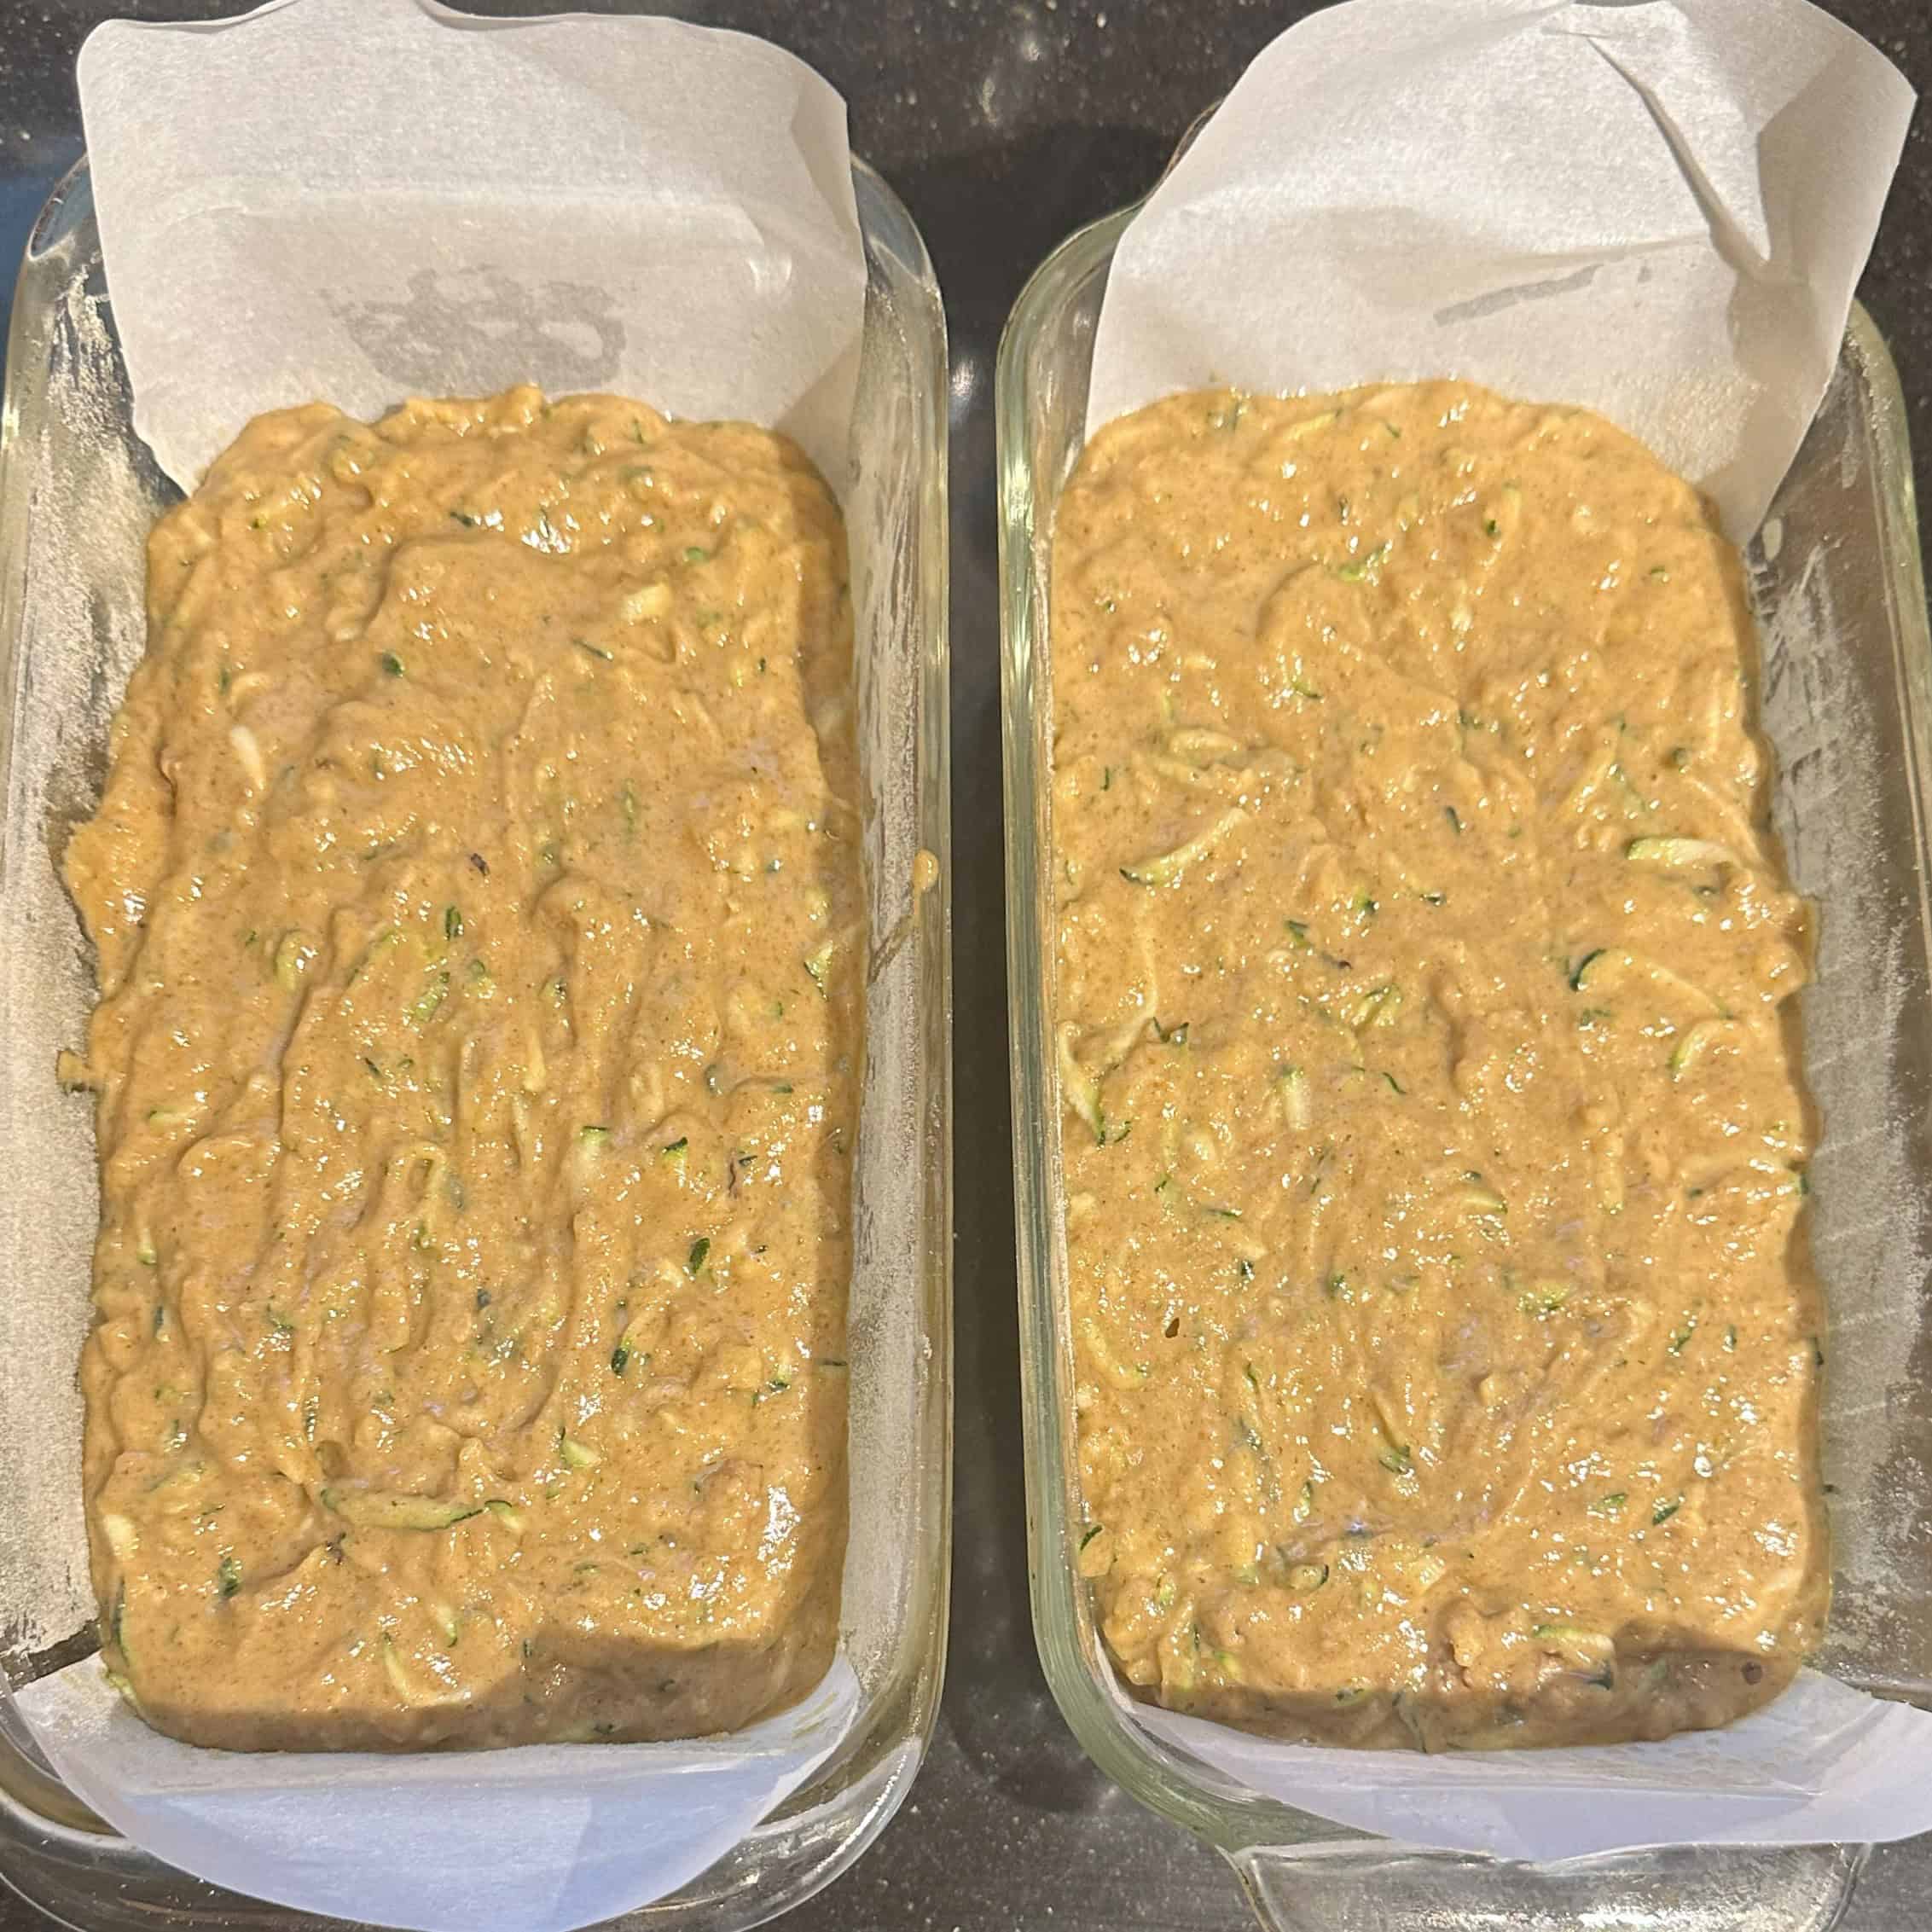 Zucchini bread batter in two loaf pans ready for baking.